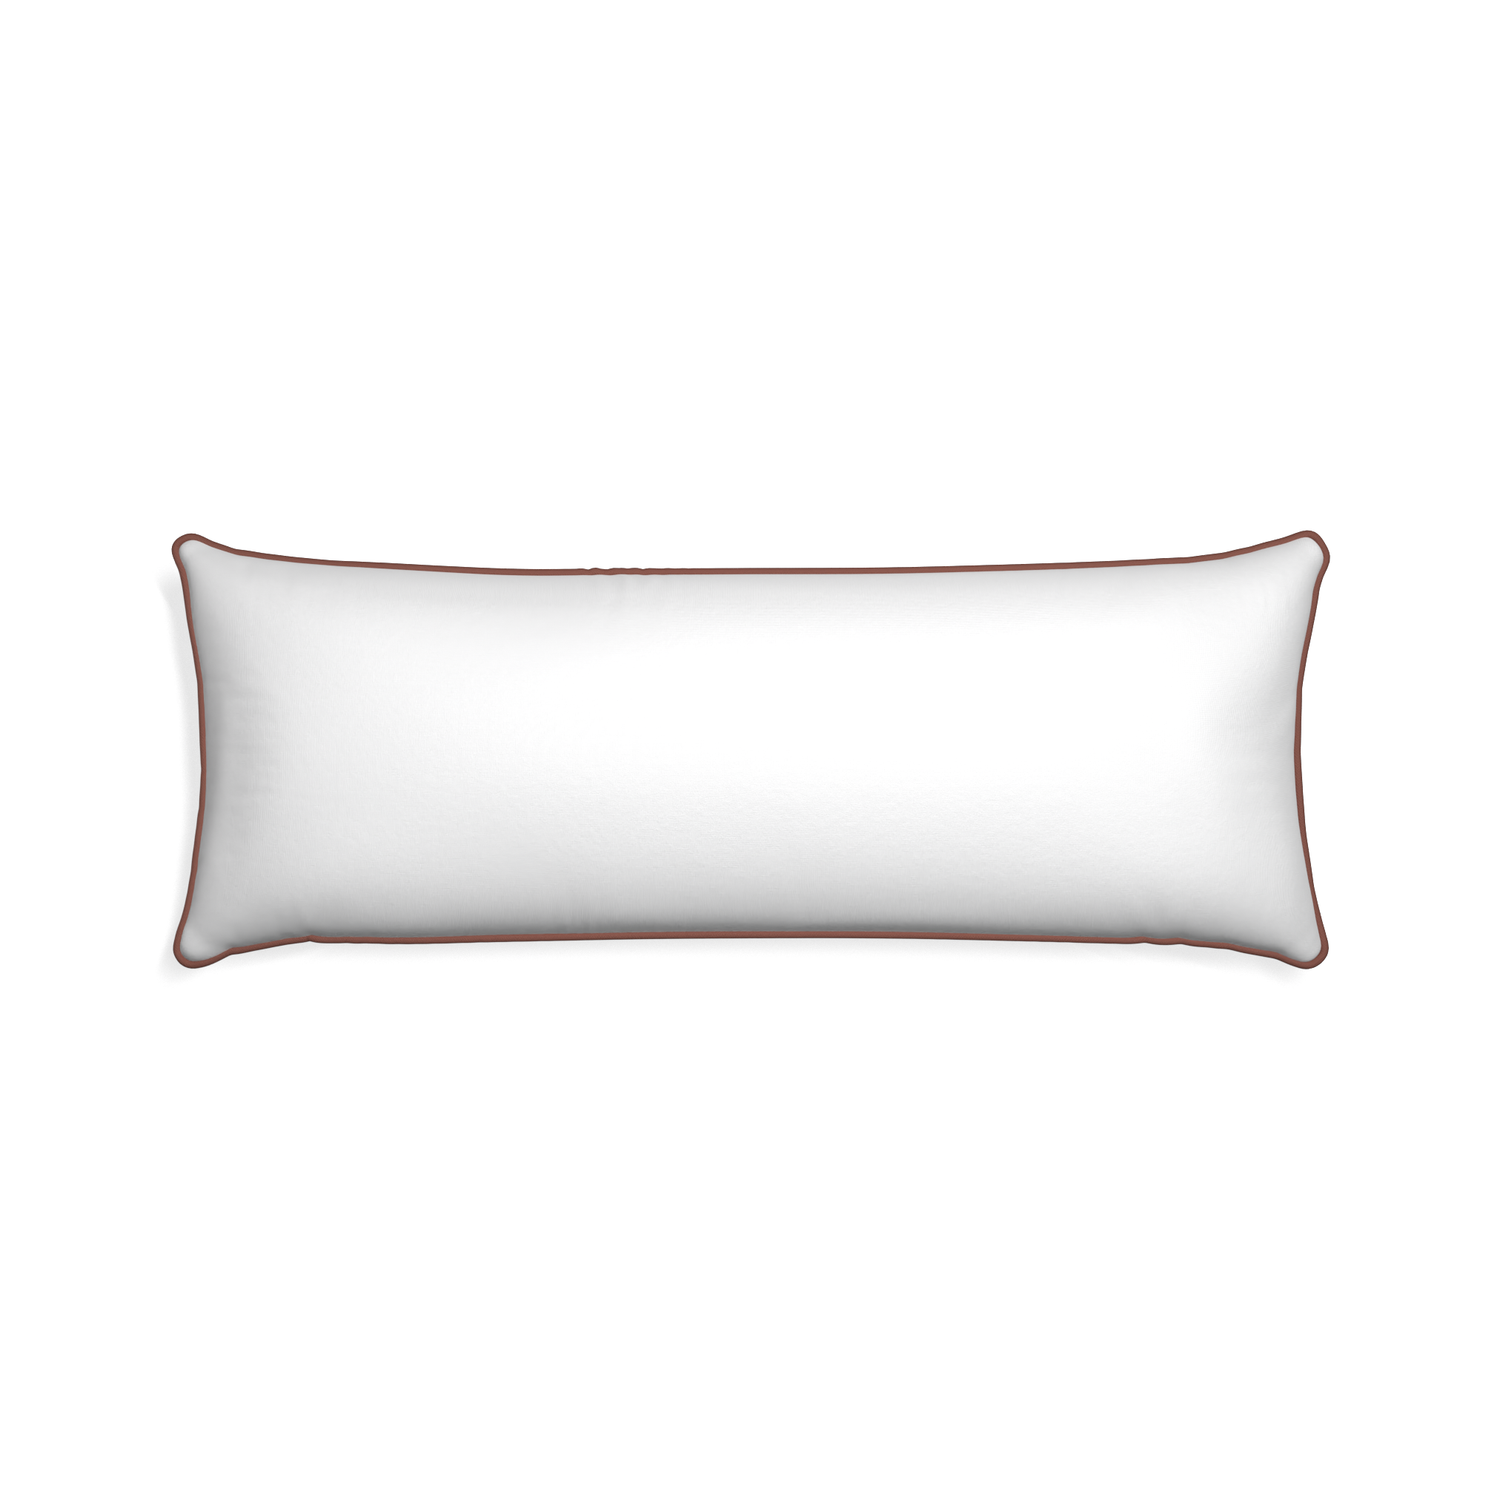 Xl-lumbar snow custom pillow with w piping on white background